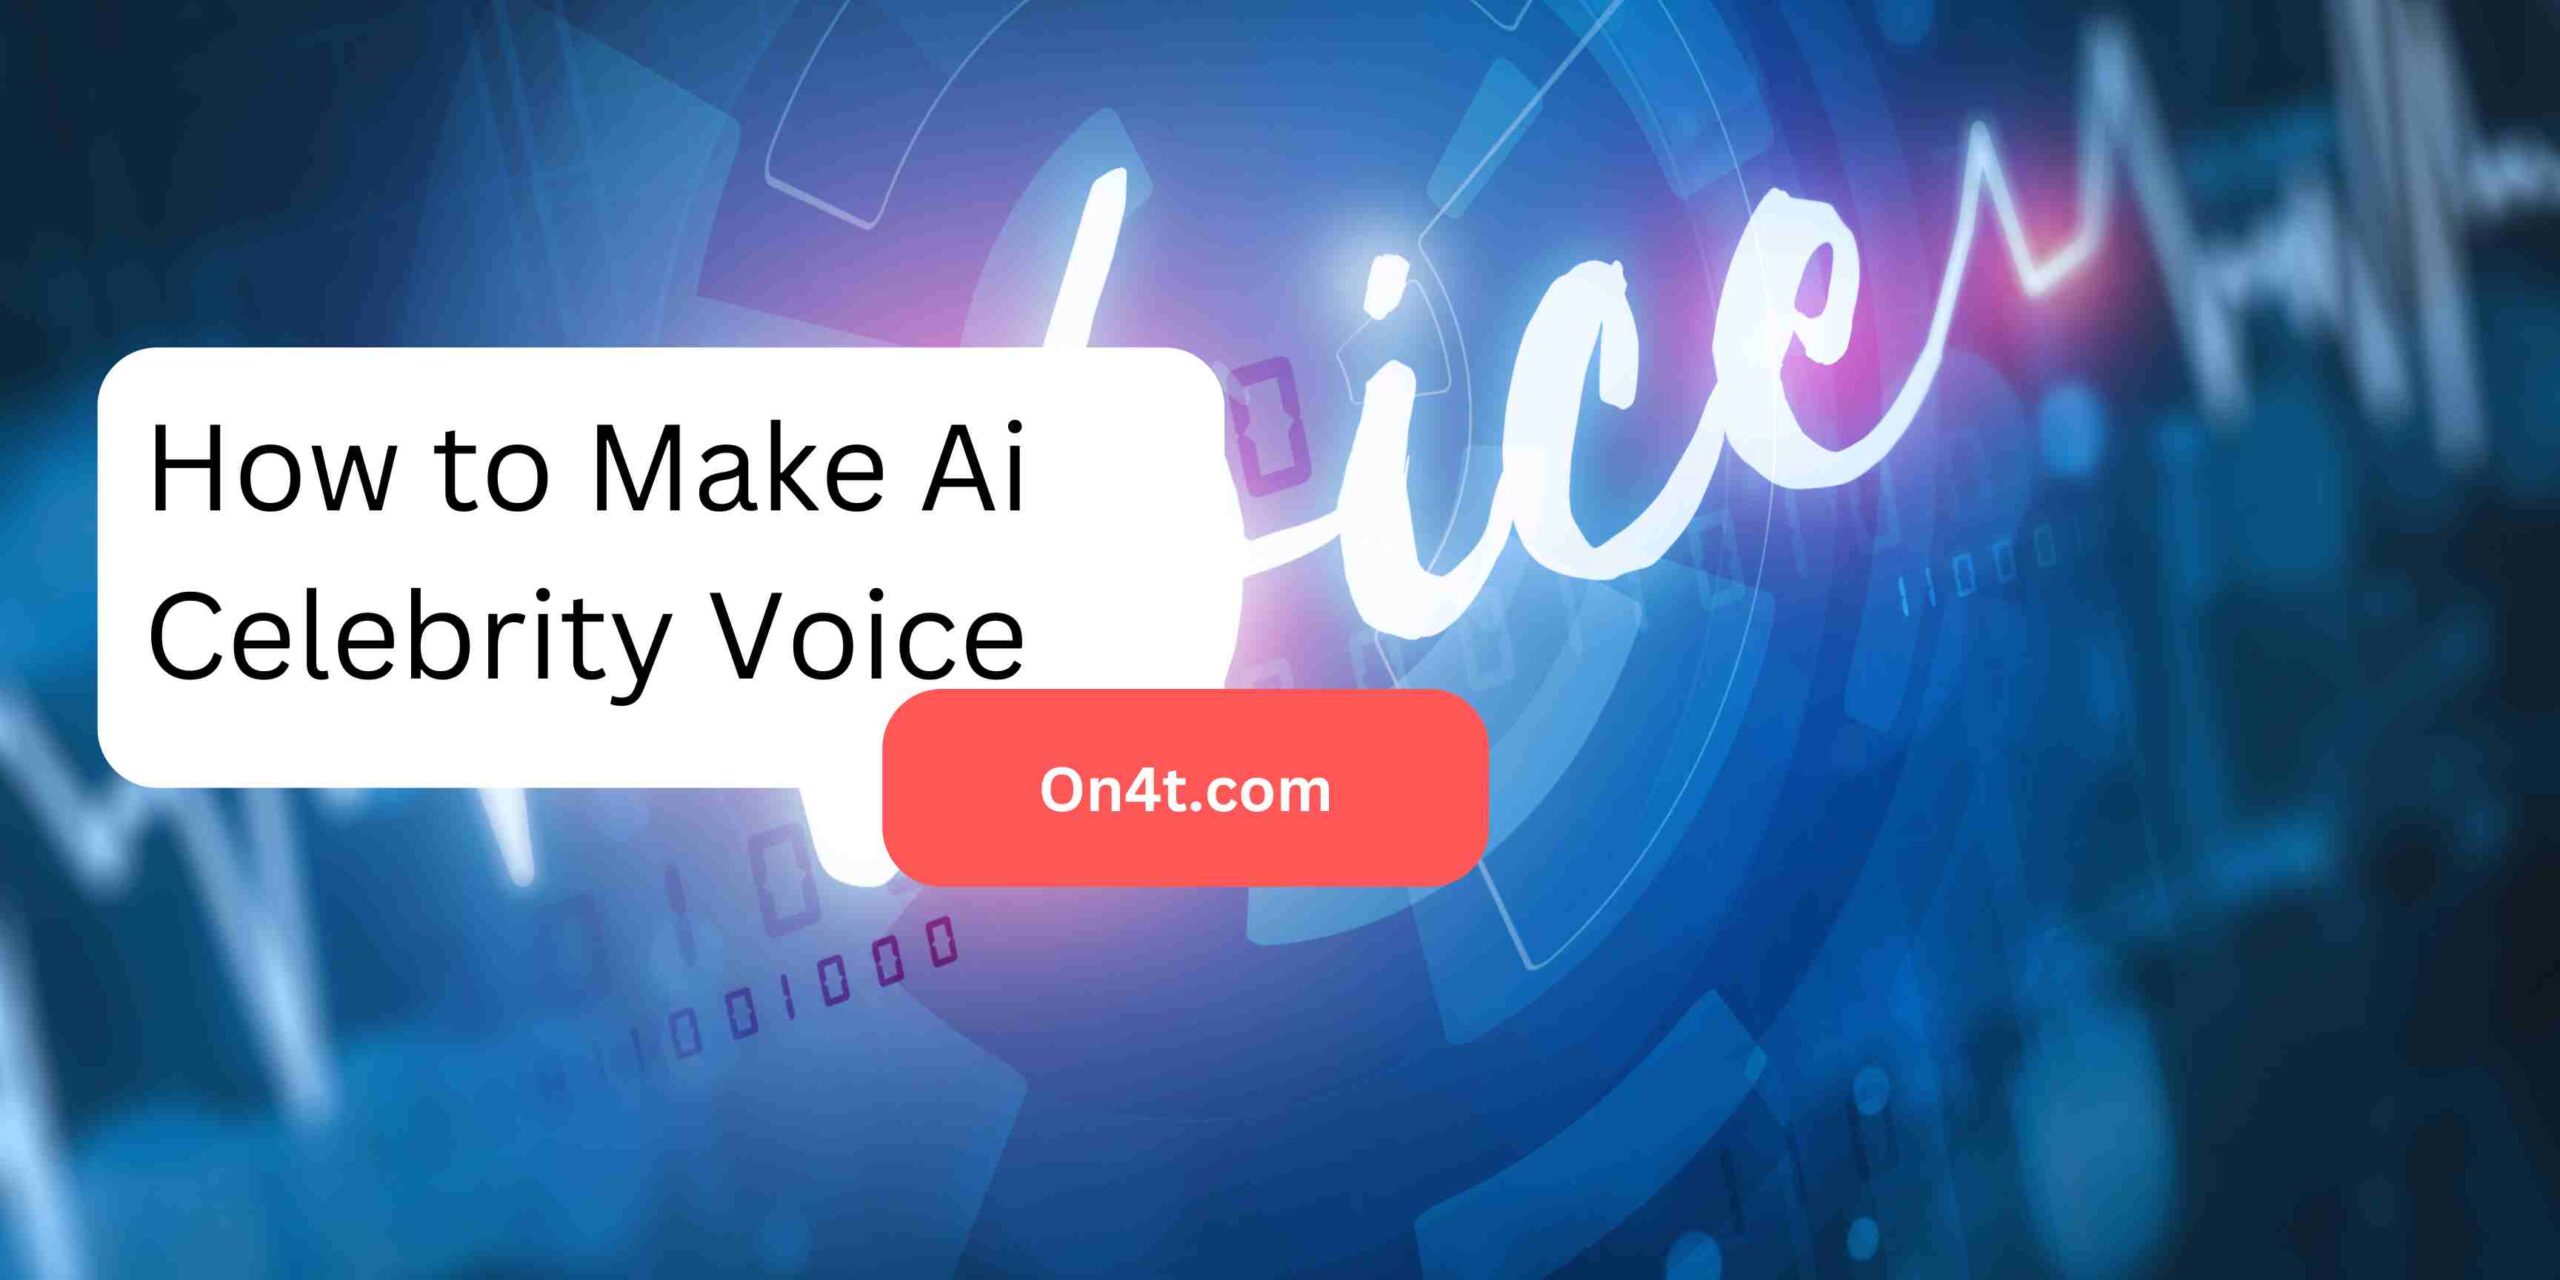 How to Make Ai Celebrity Voice